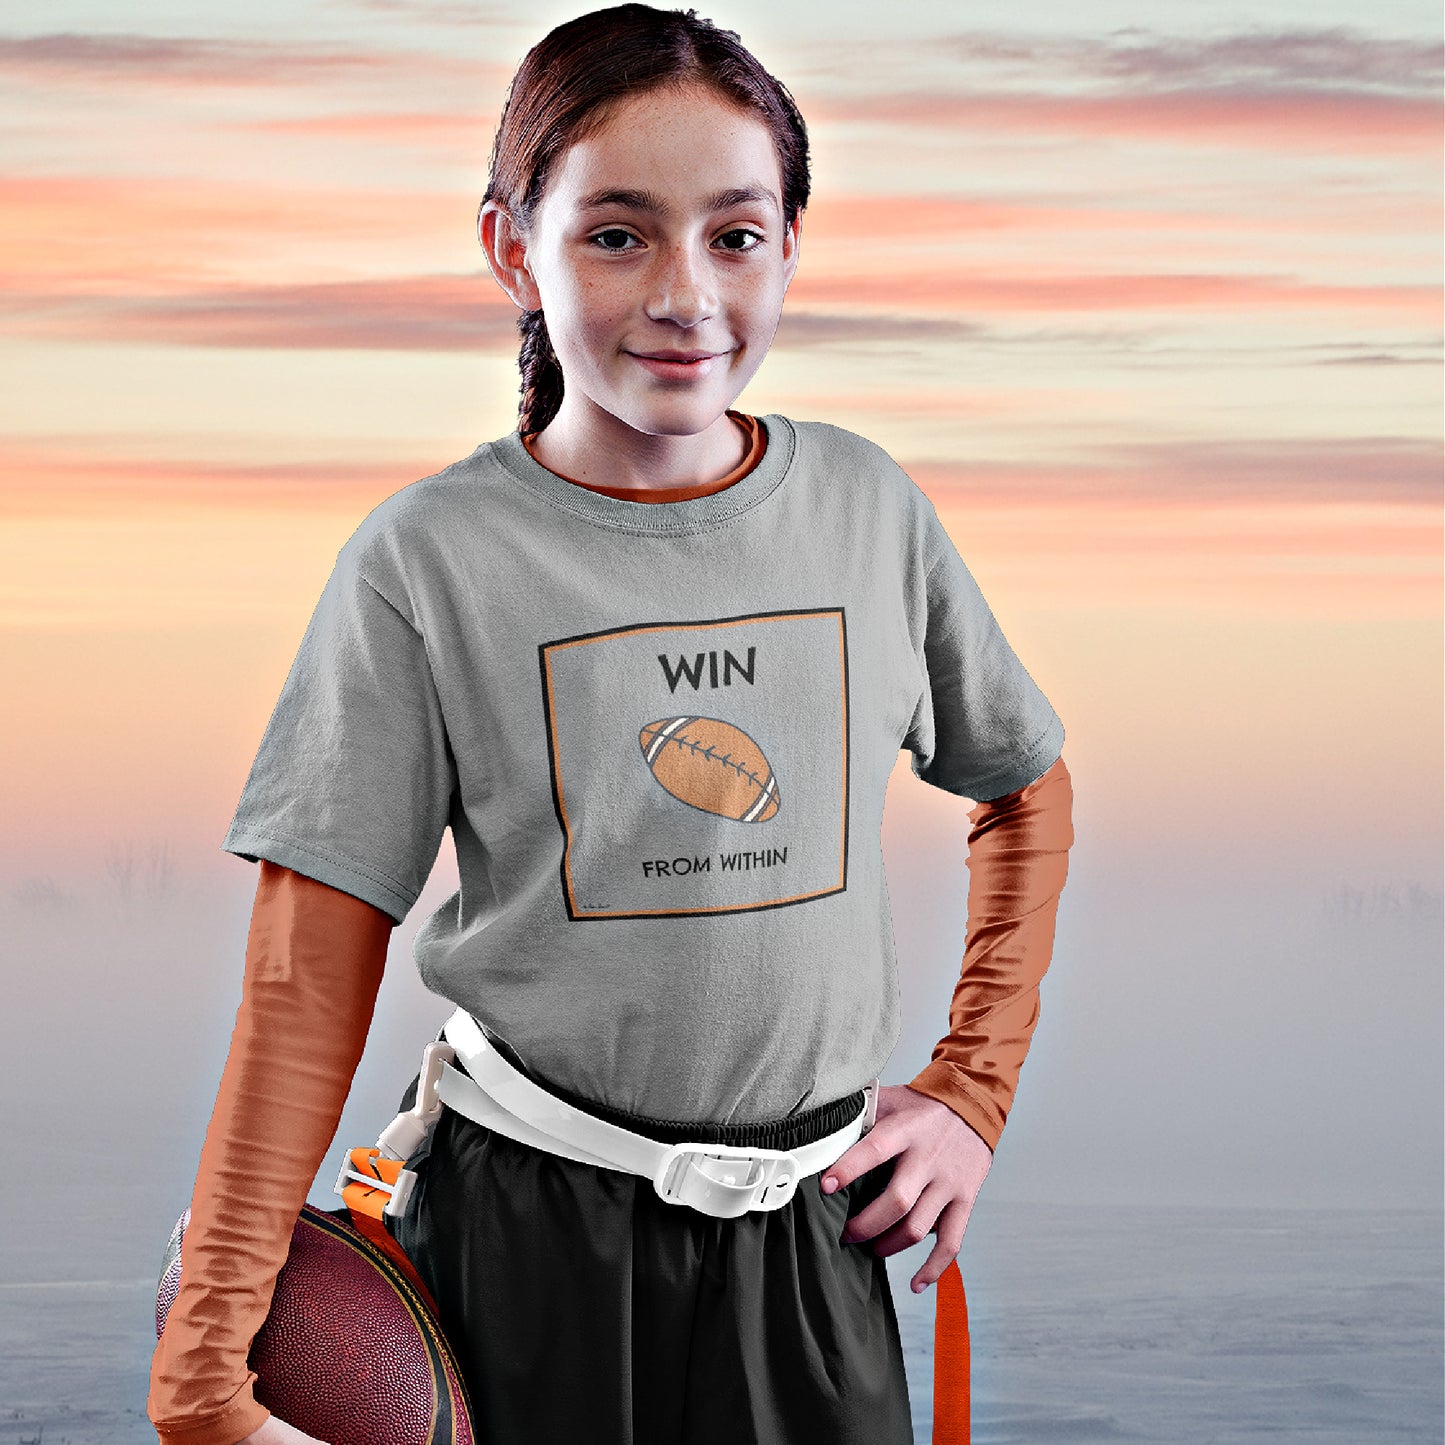 Mock up of a happy girl holding a football and wearing our T-shirt